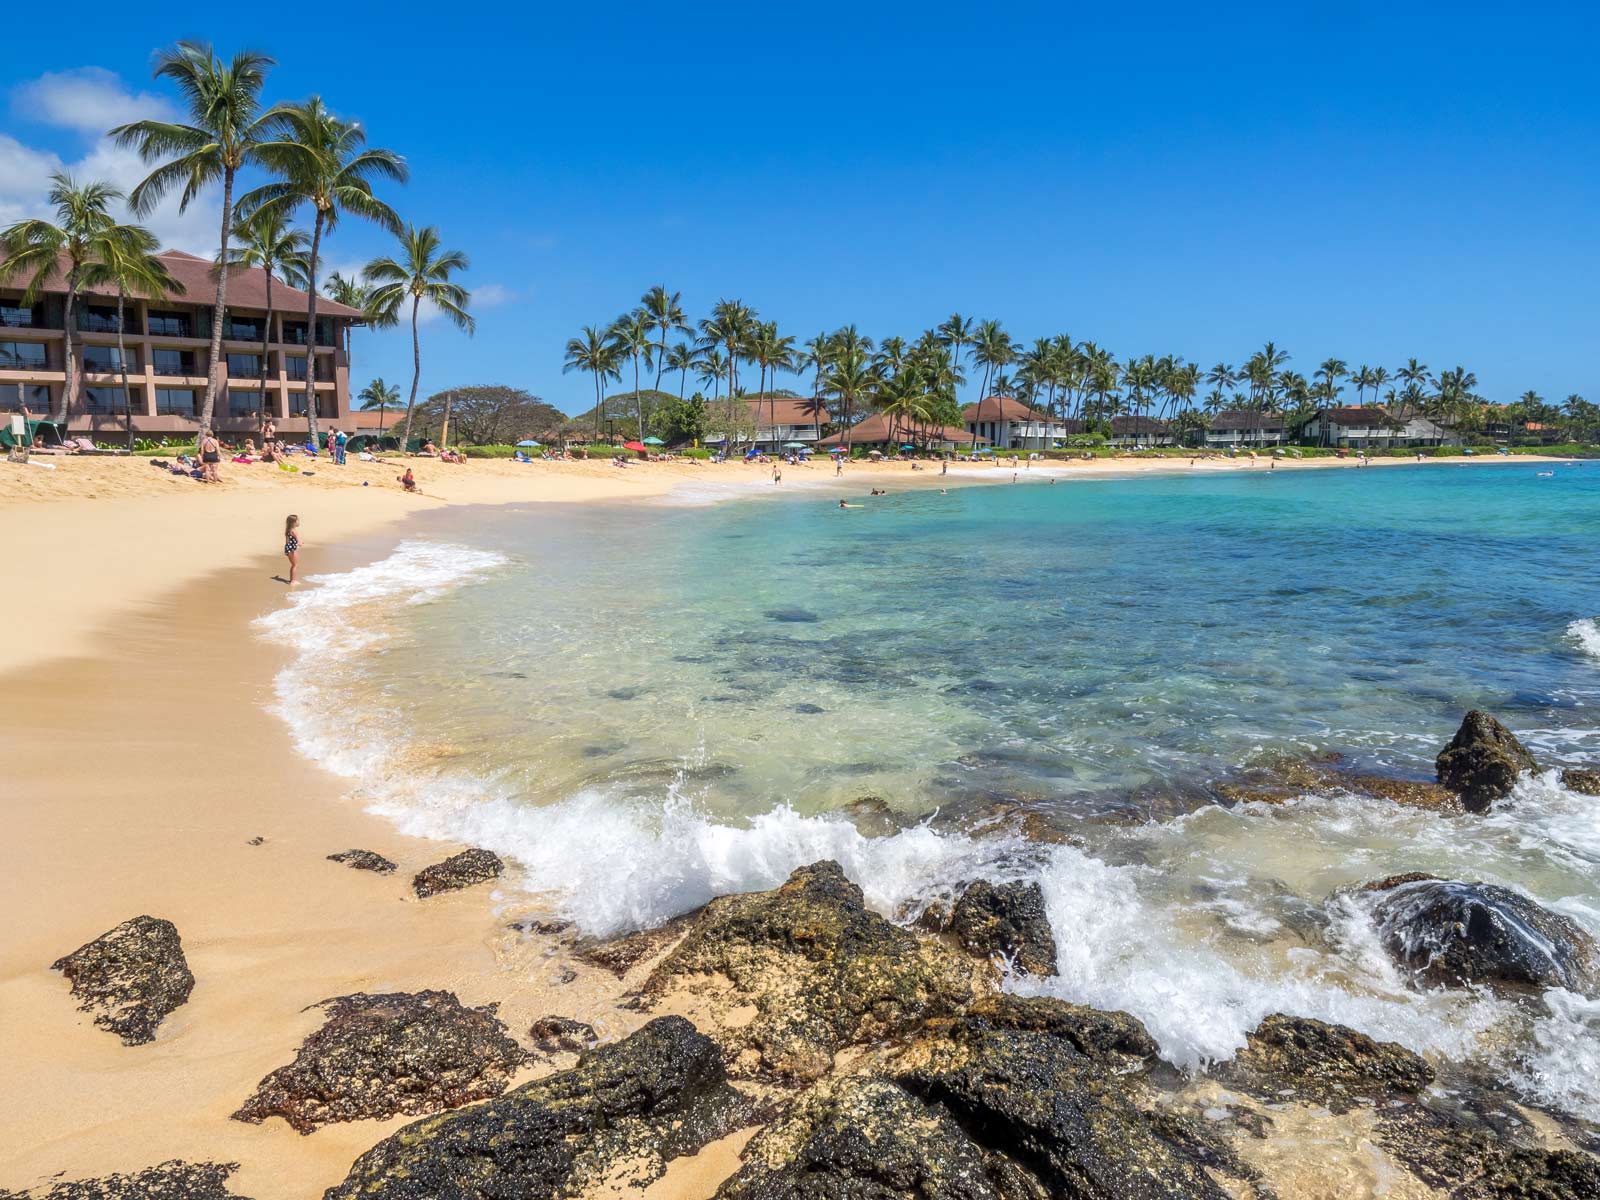 Where to stay in Kauai on the South Shore